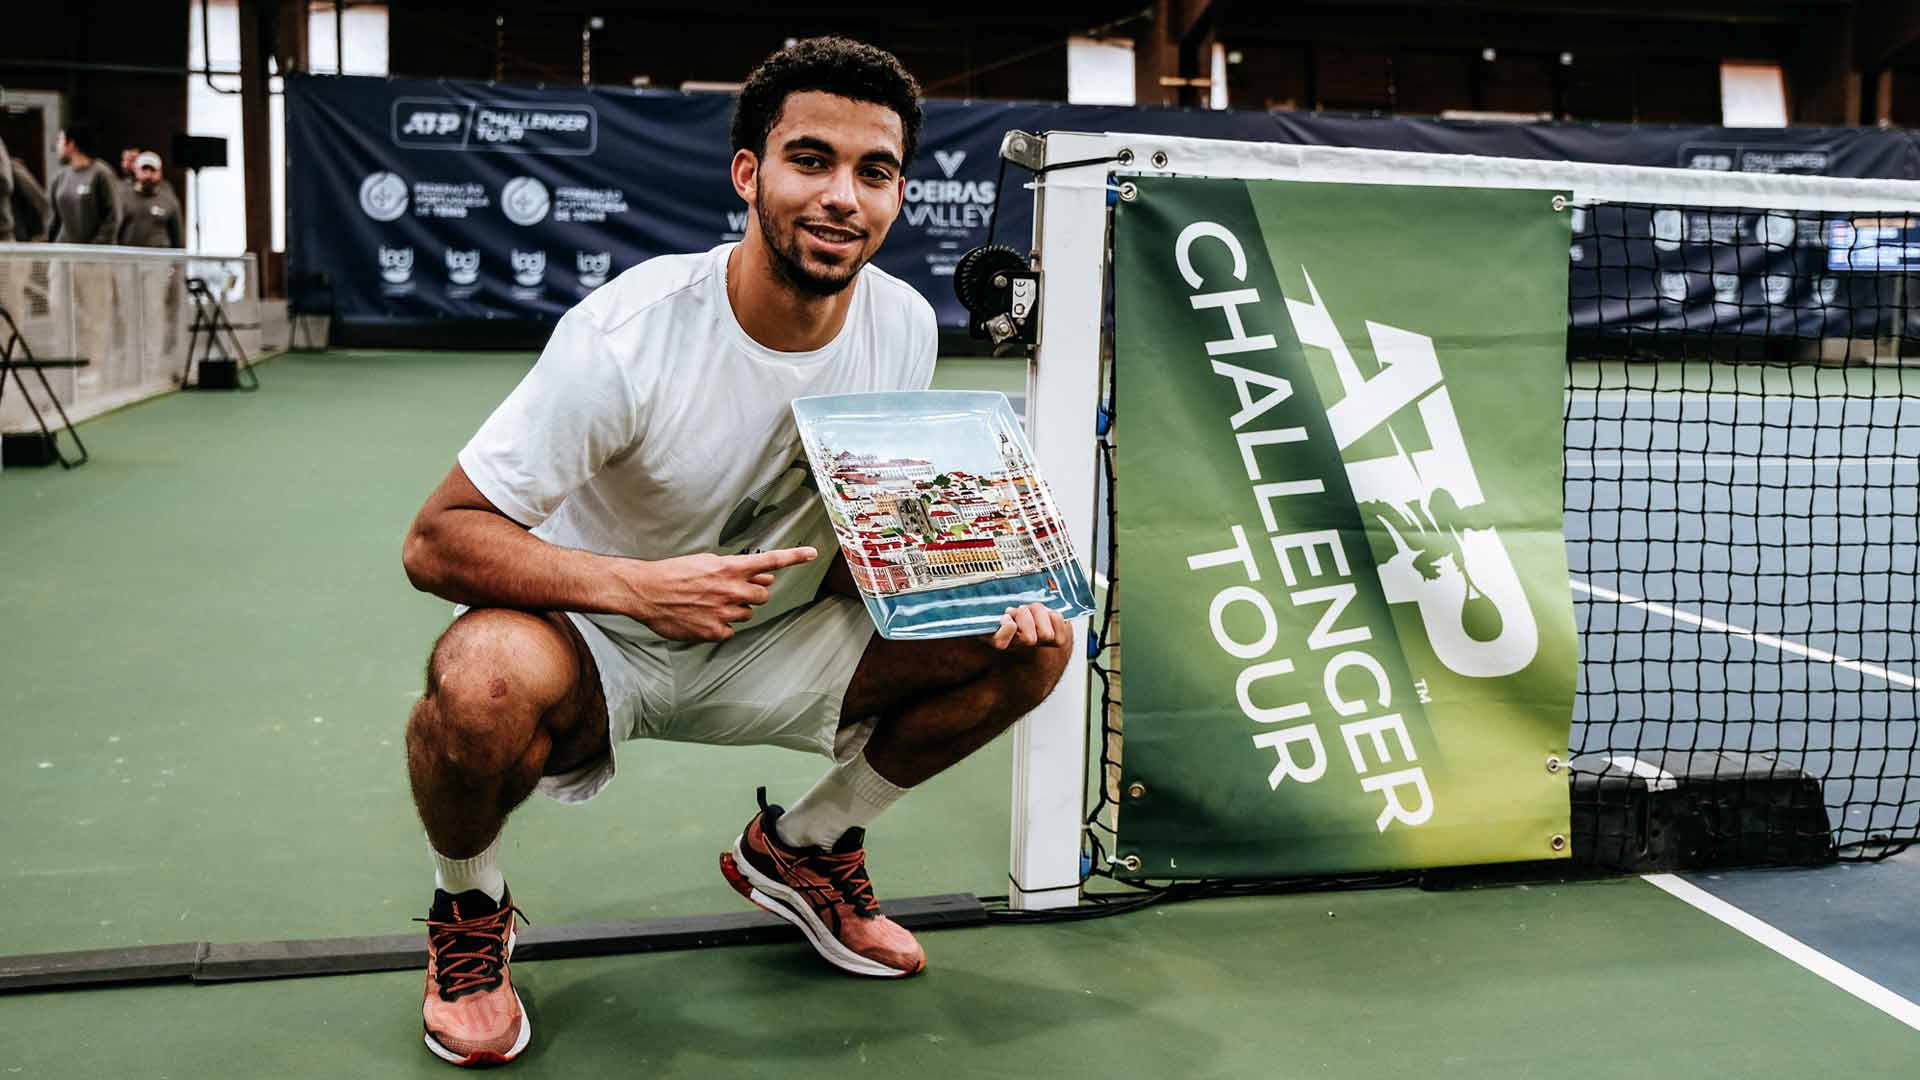 Arthur Fils triumphs at the Challenger 75 event in Oeiras, Portugal.